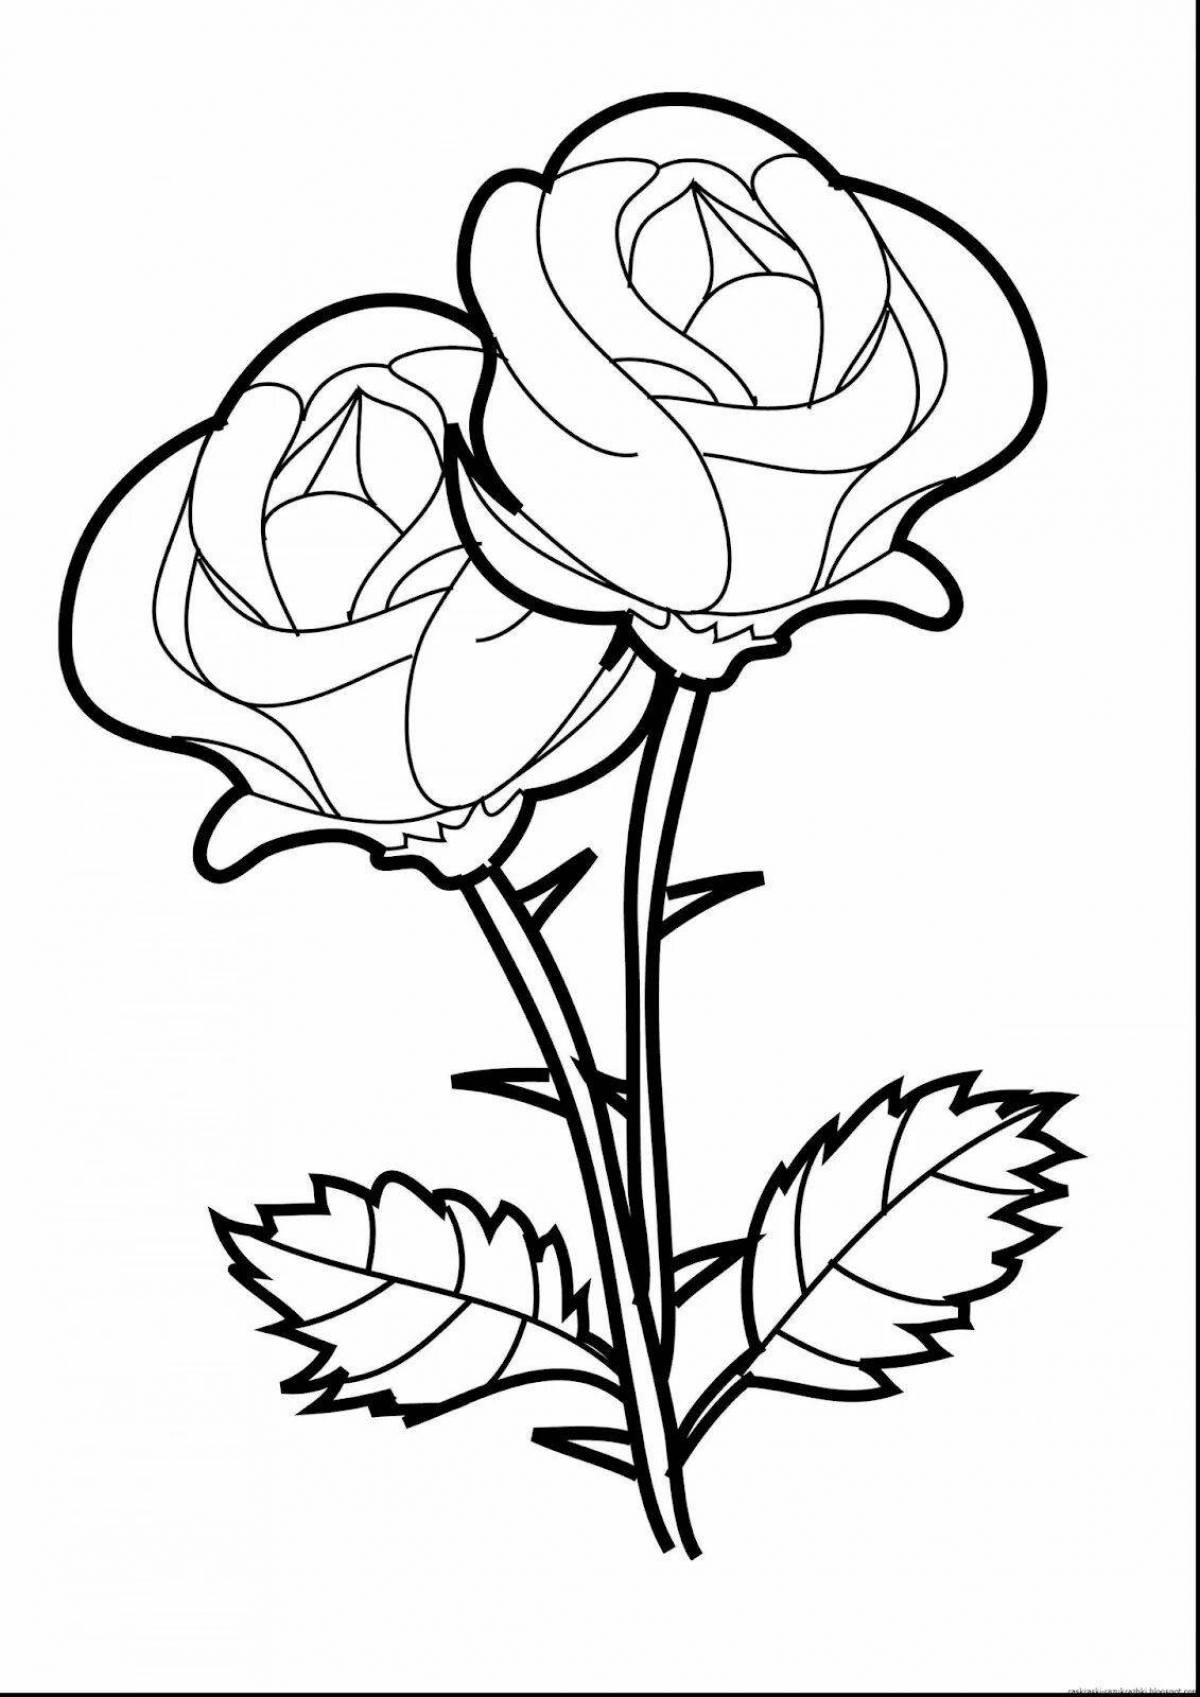 Coloring book brightly colored rose